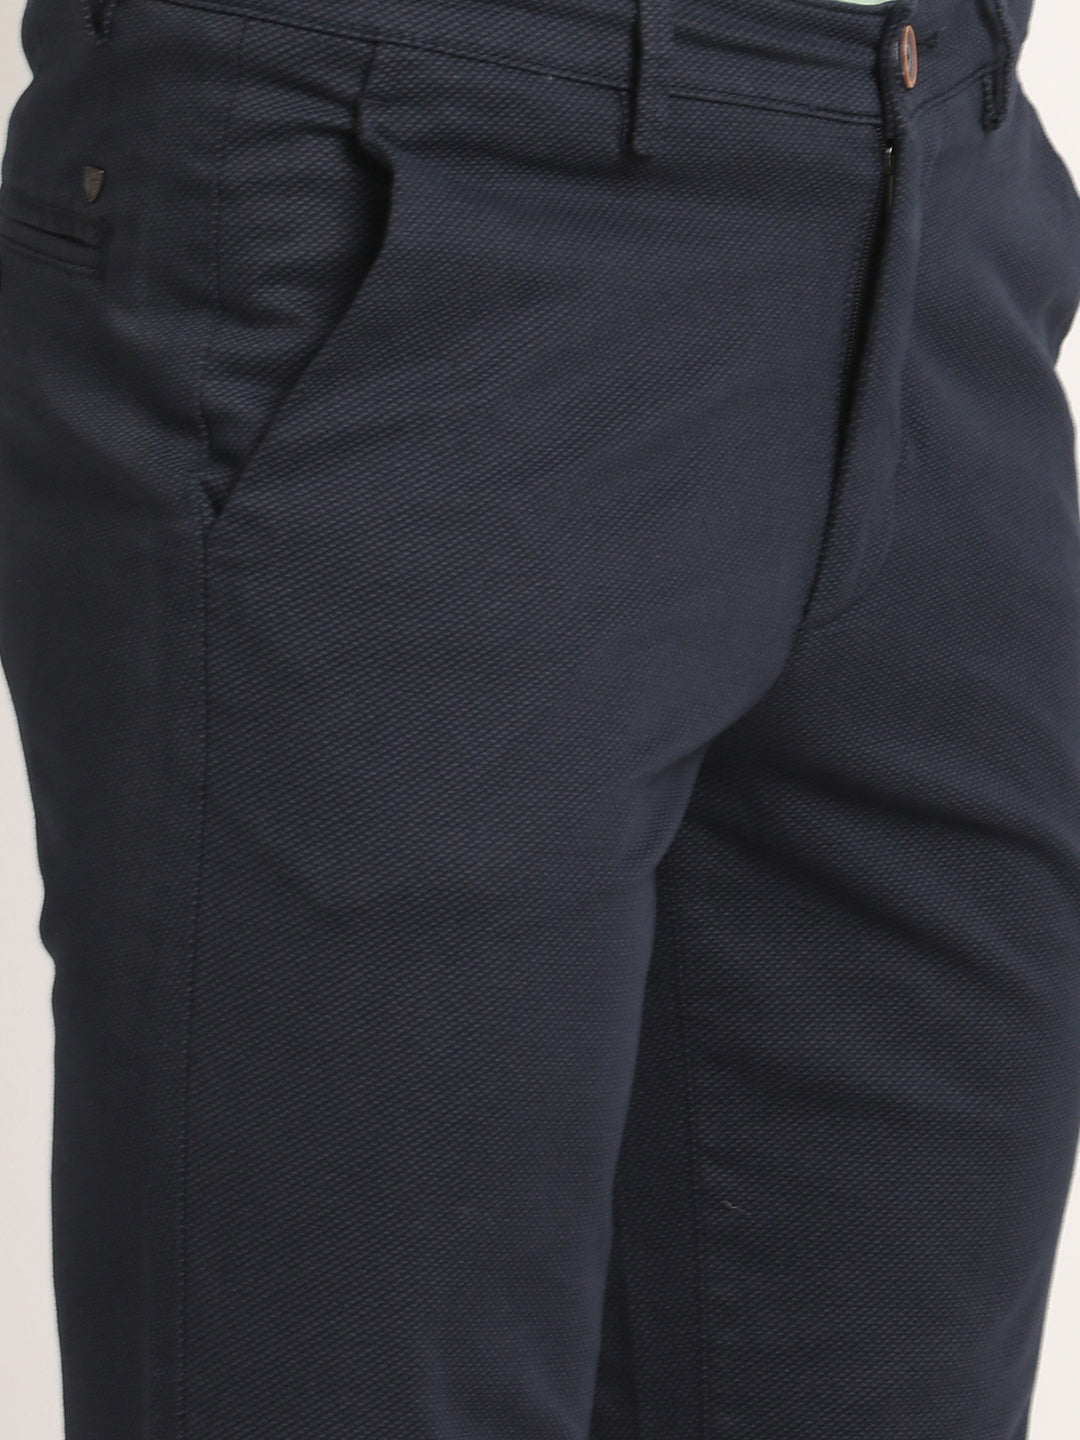 Cotton Stretch Navy Printed Ultra Slim Fit Flat Front Casual Trouser